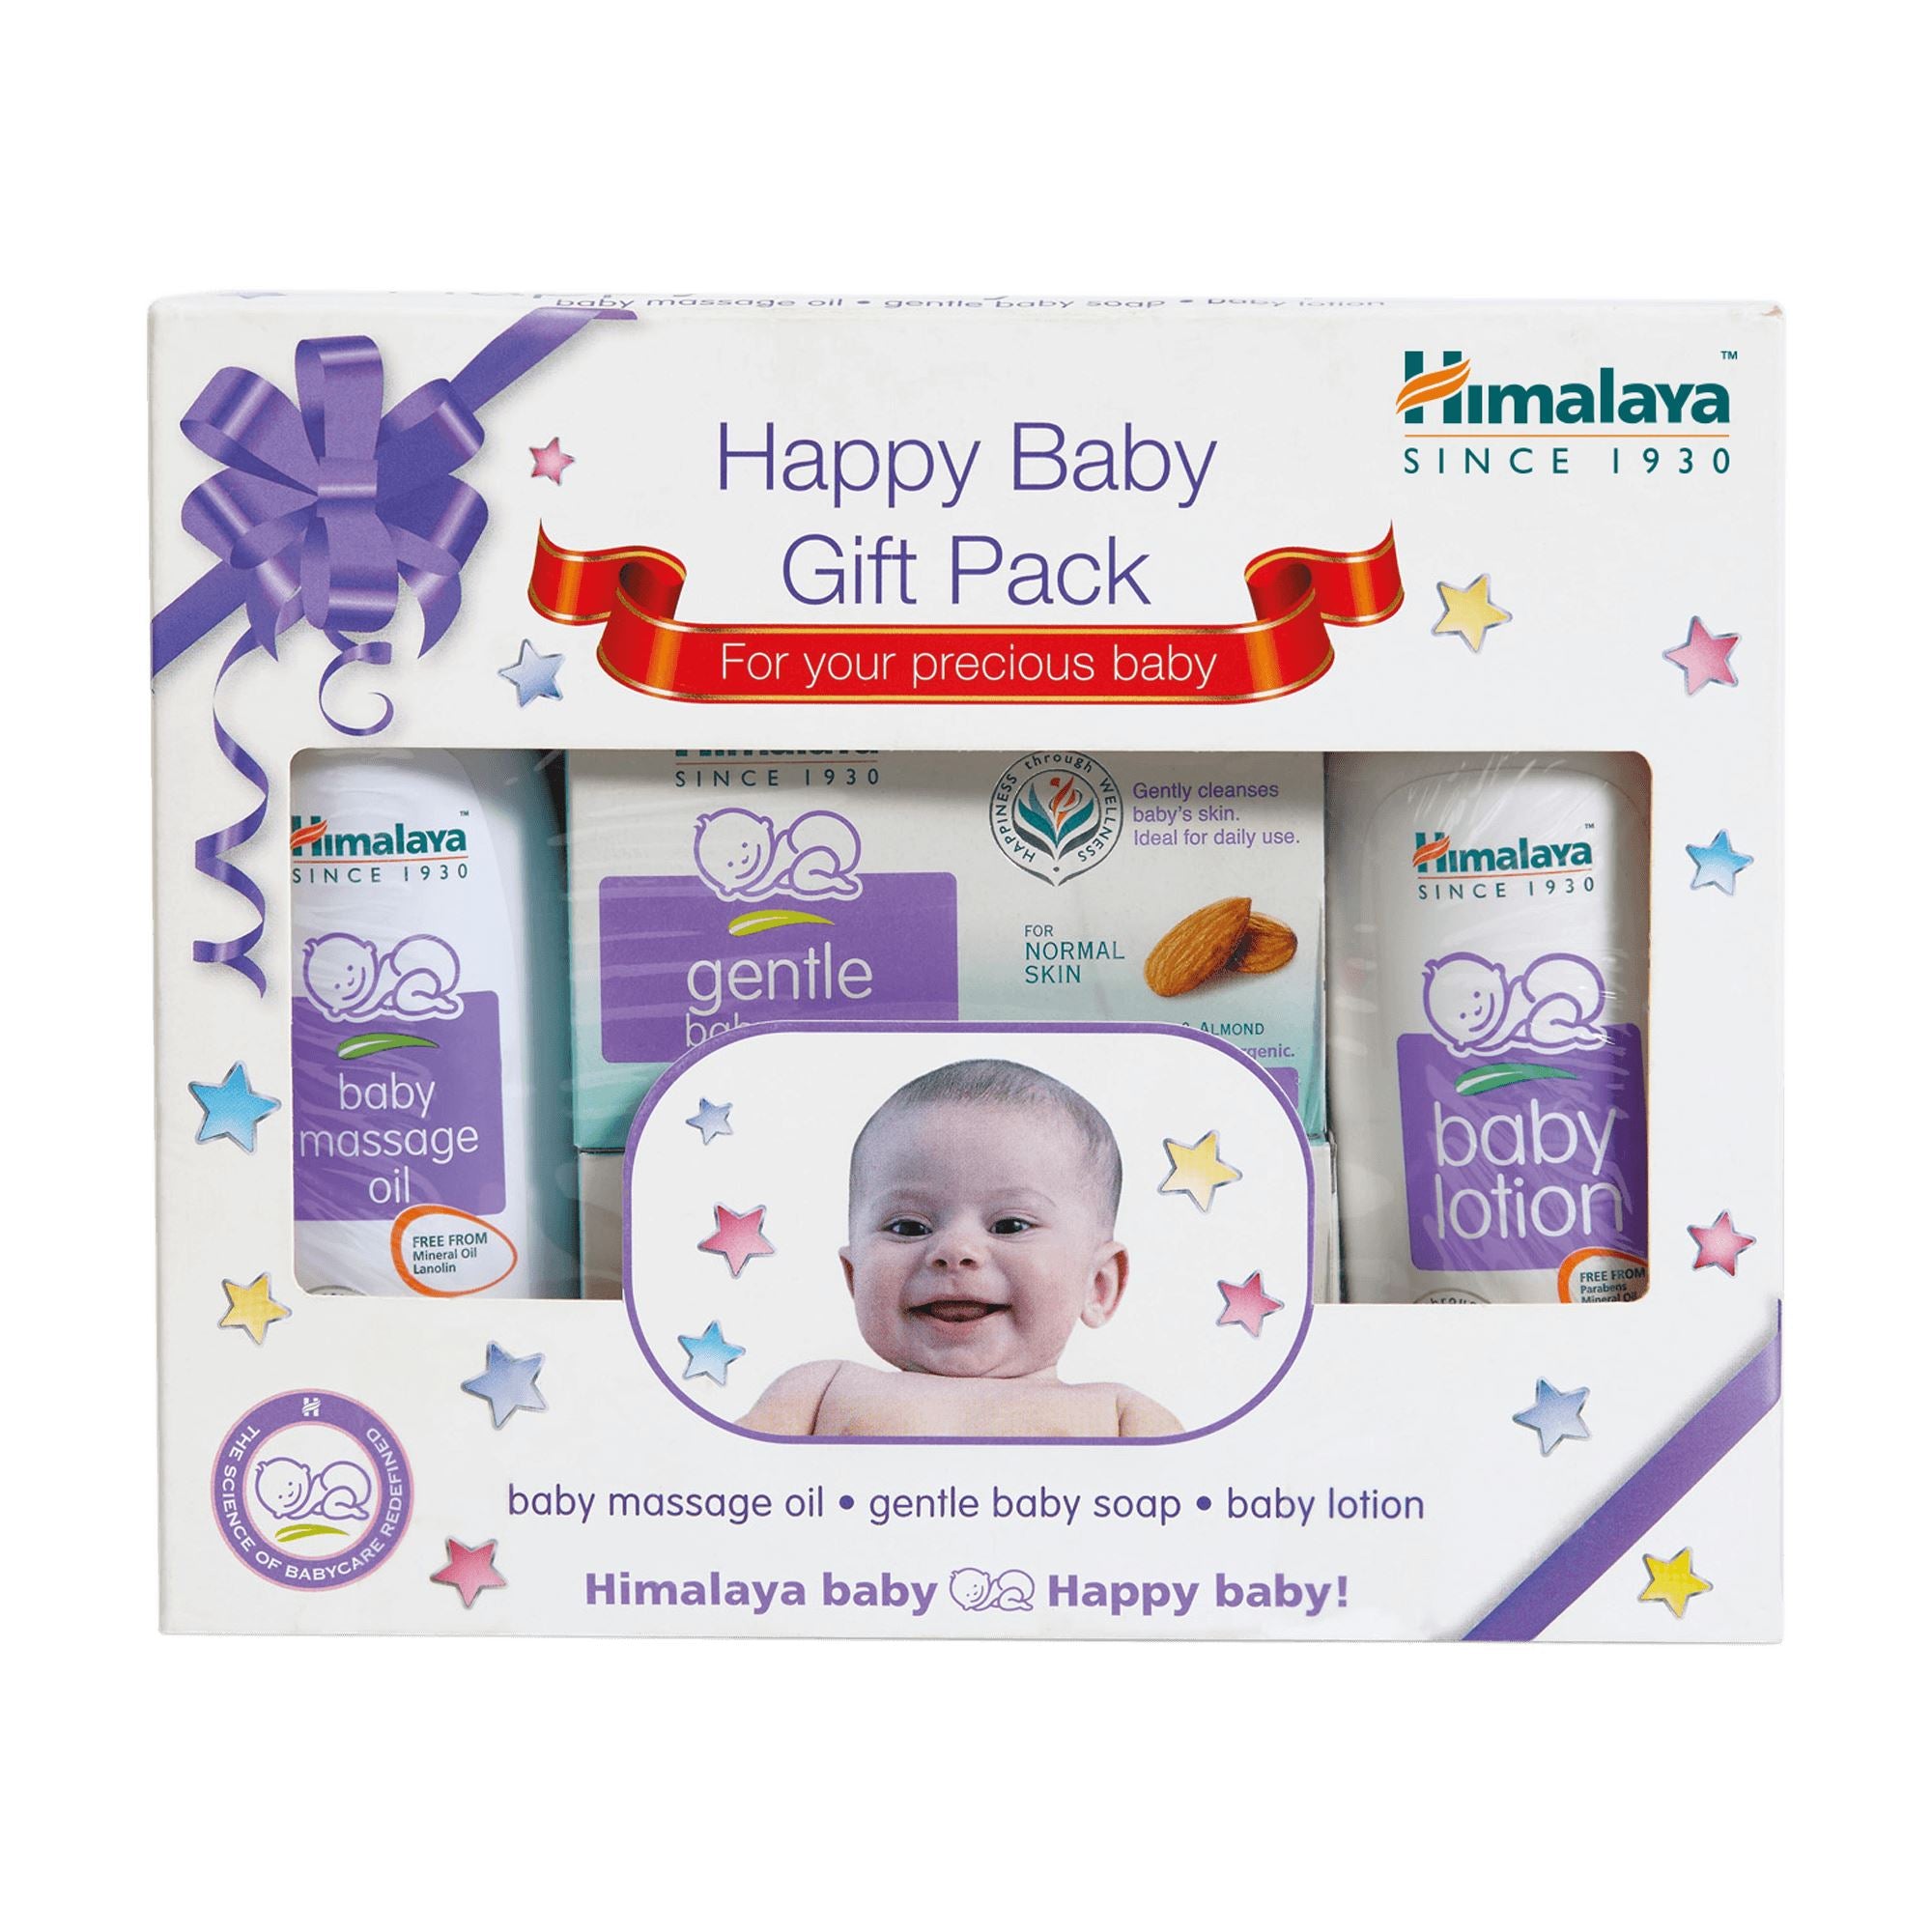 Himalaya Babycare Gift Pack (Oil-Soap-Lotion) - Himalaya baby oil, soap, and lotion